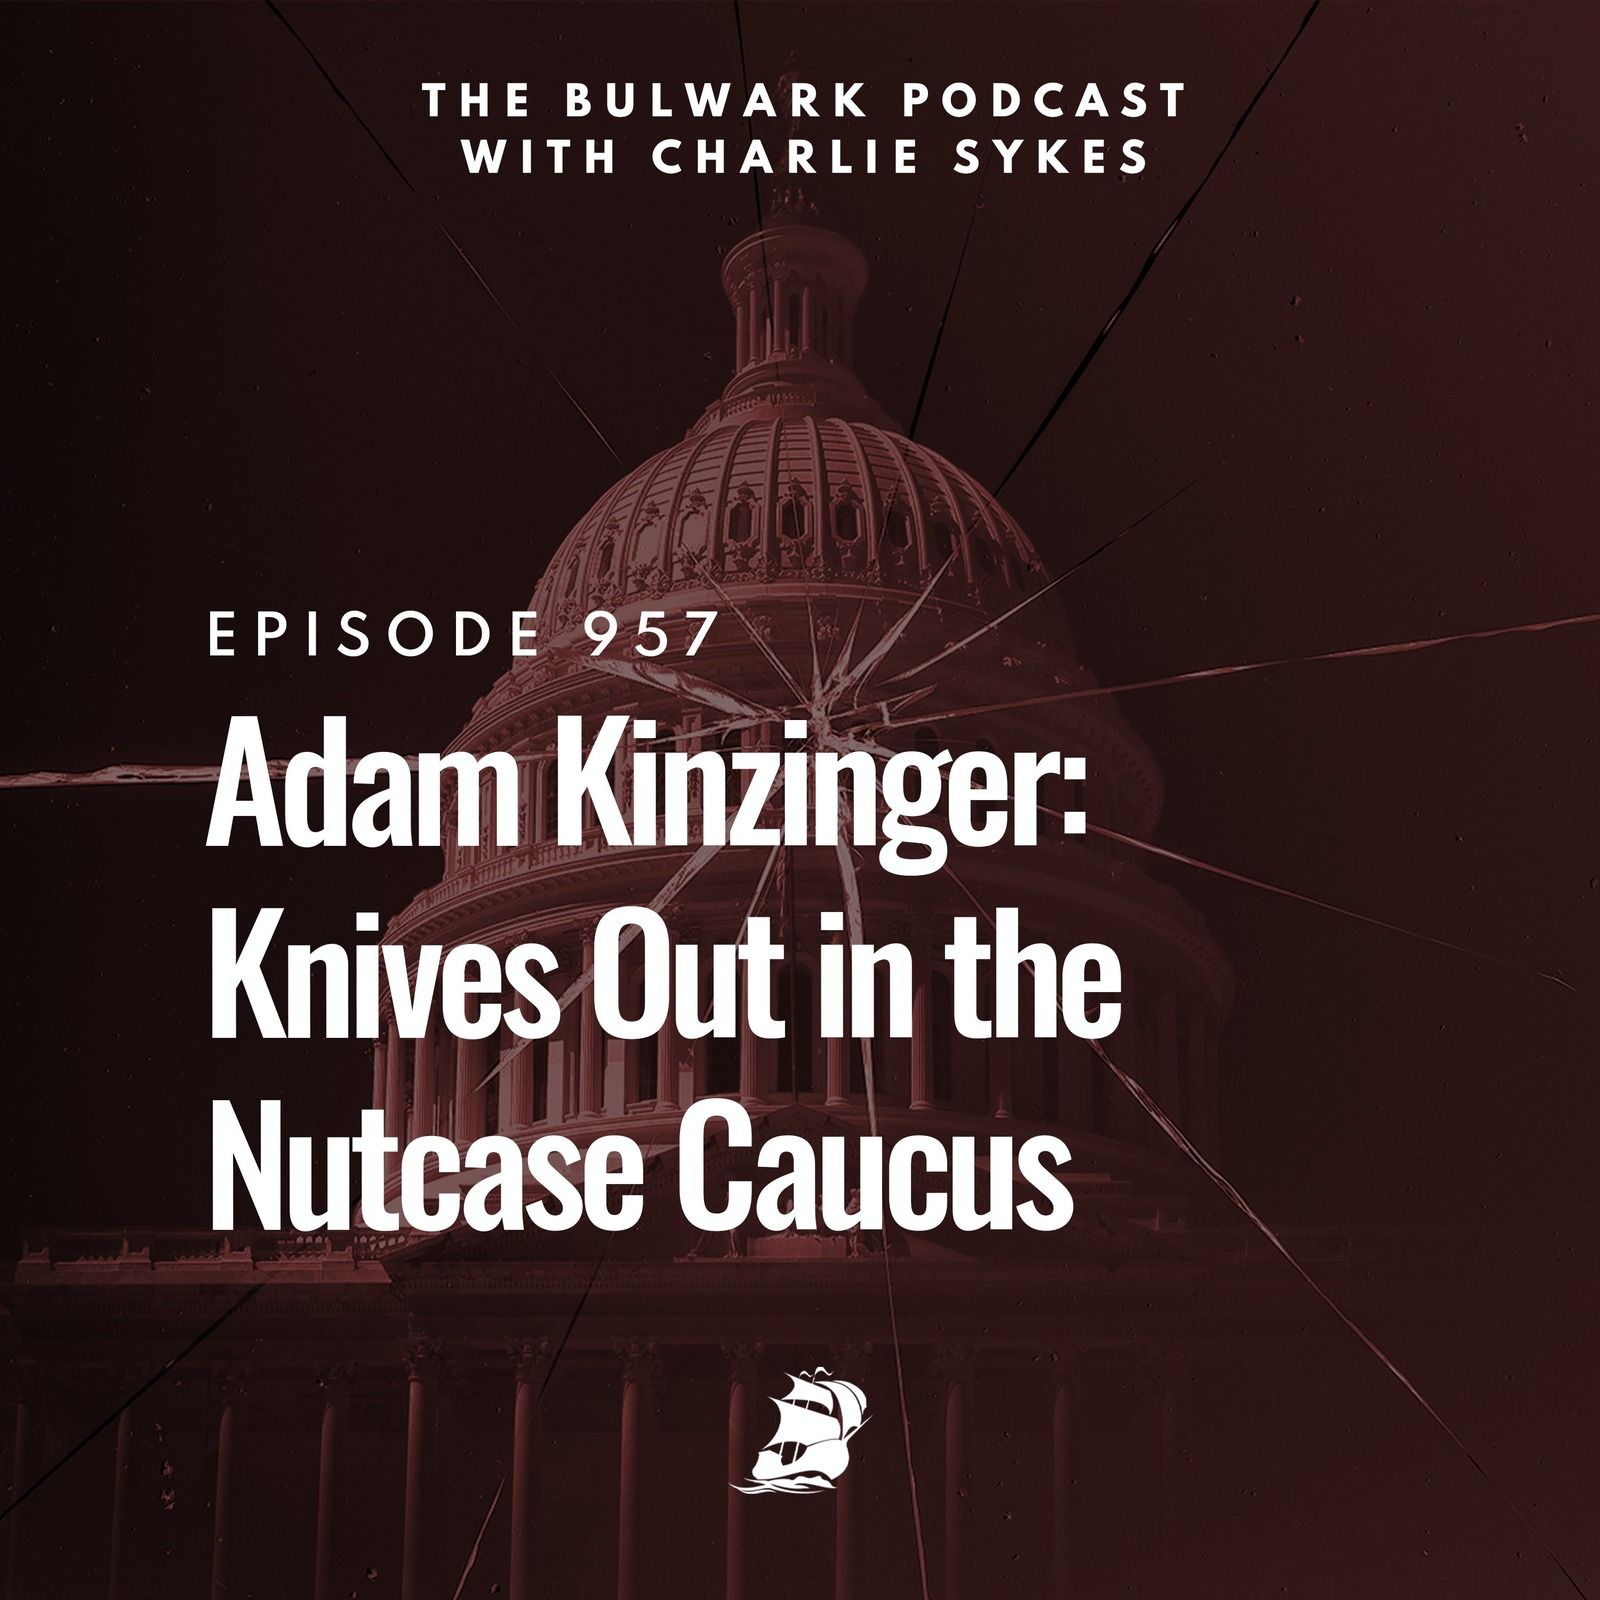 Adam Kinzinger: Knives Out in the Nutcase Caucus by The Bulwark Podcast